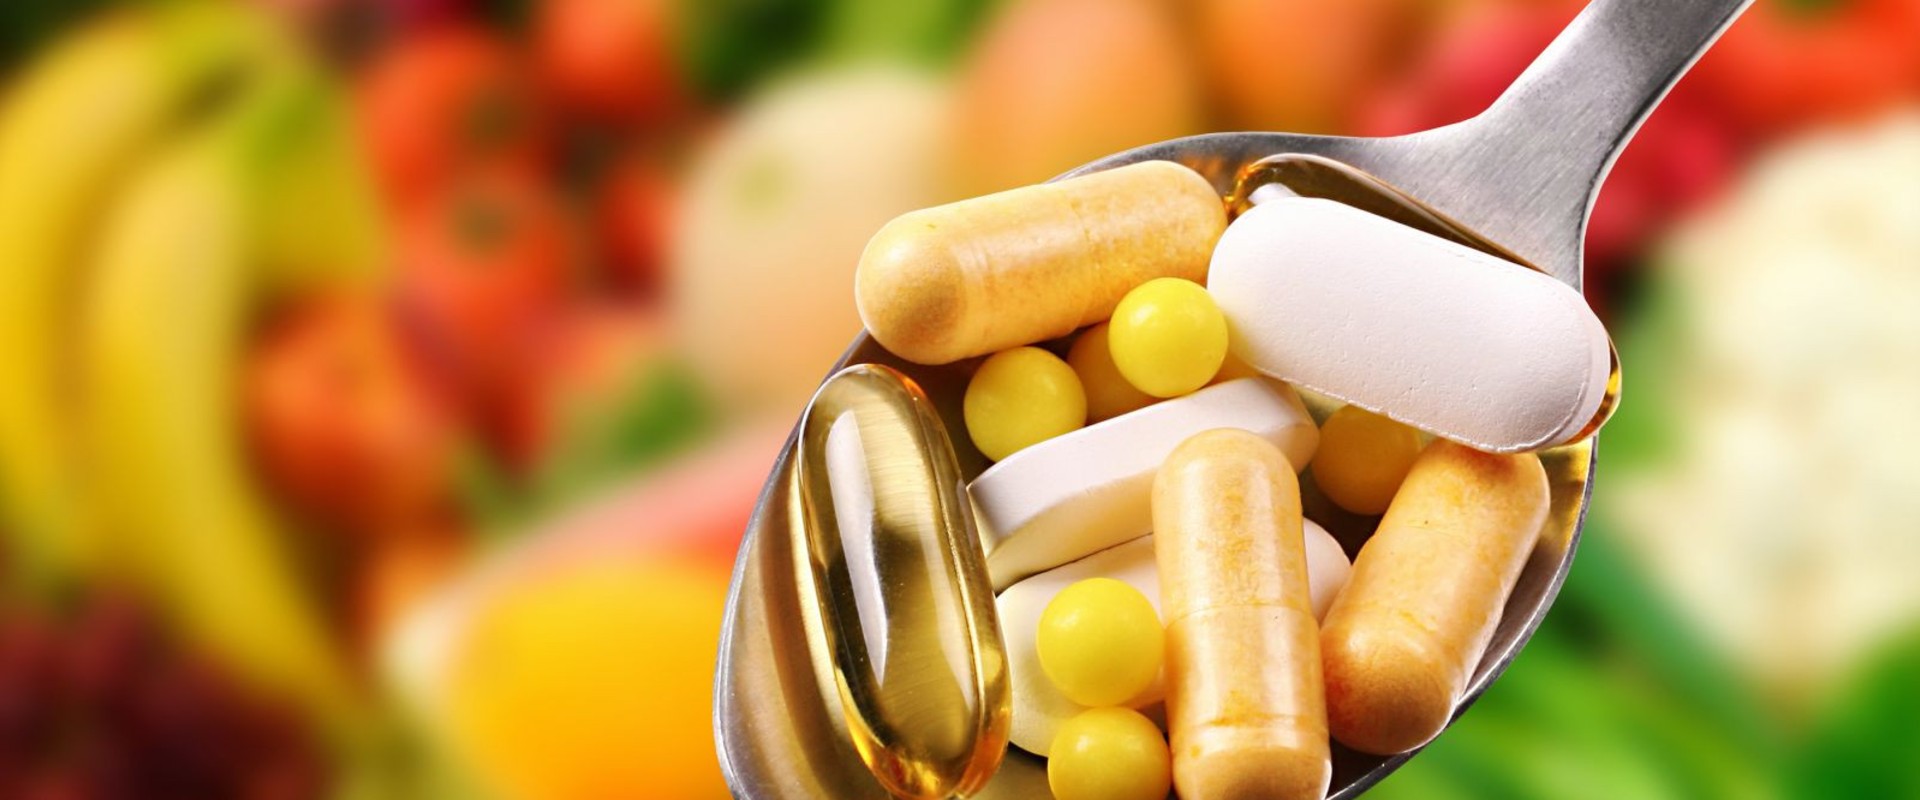 Does the us regulate supplements?